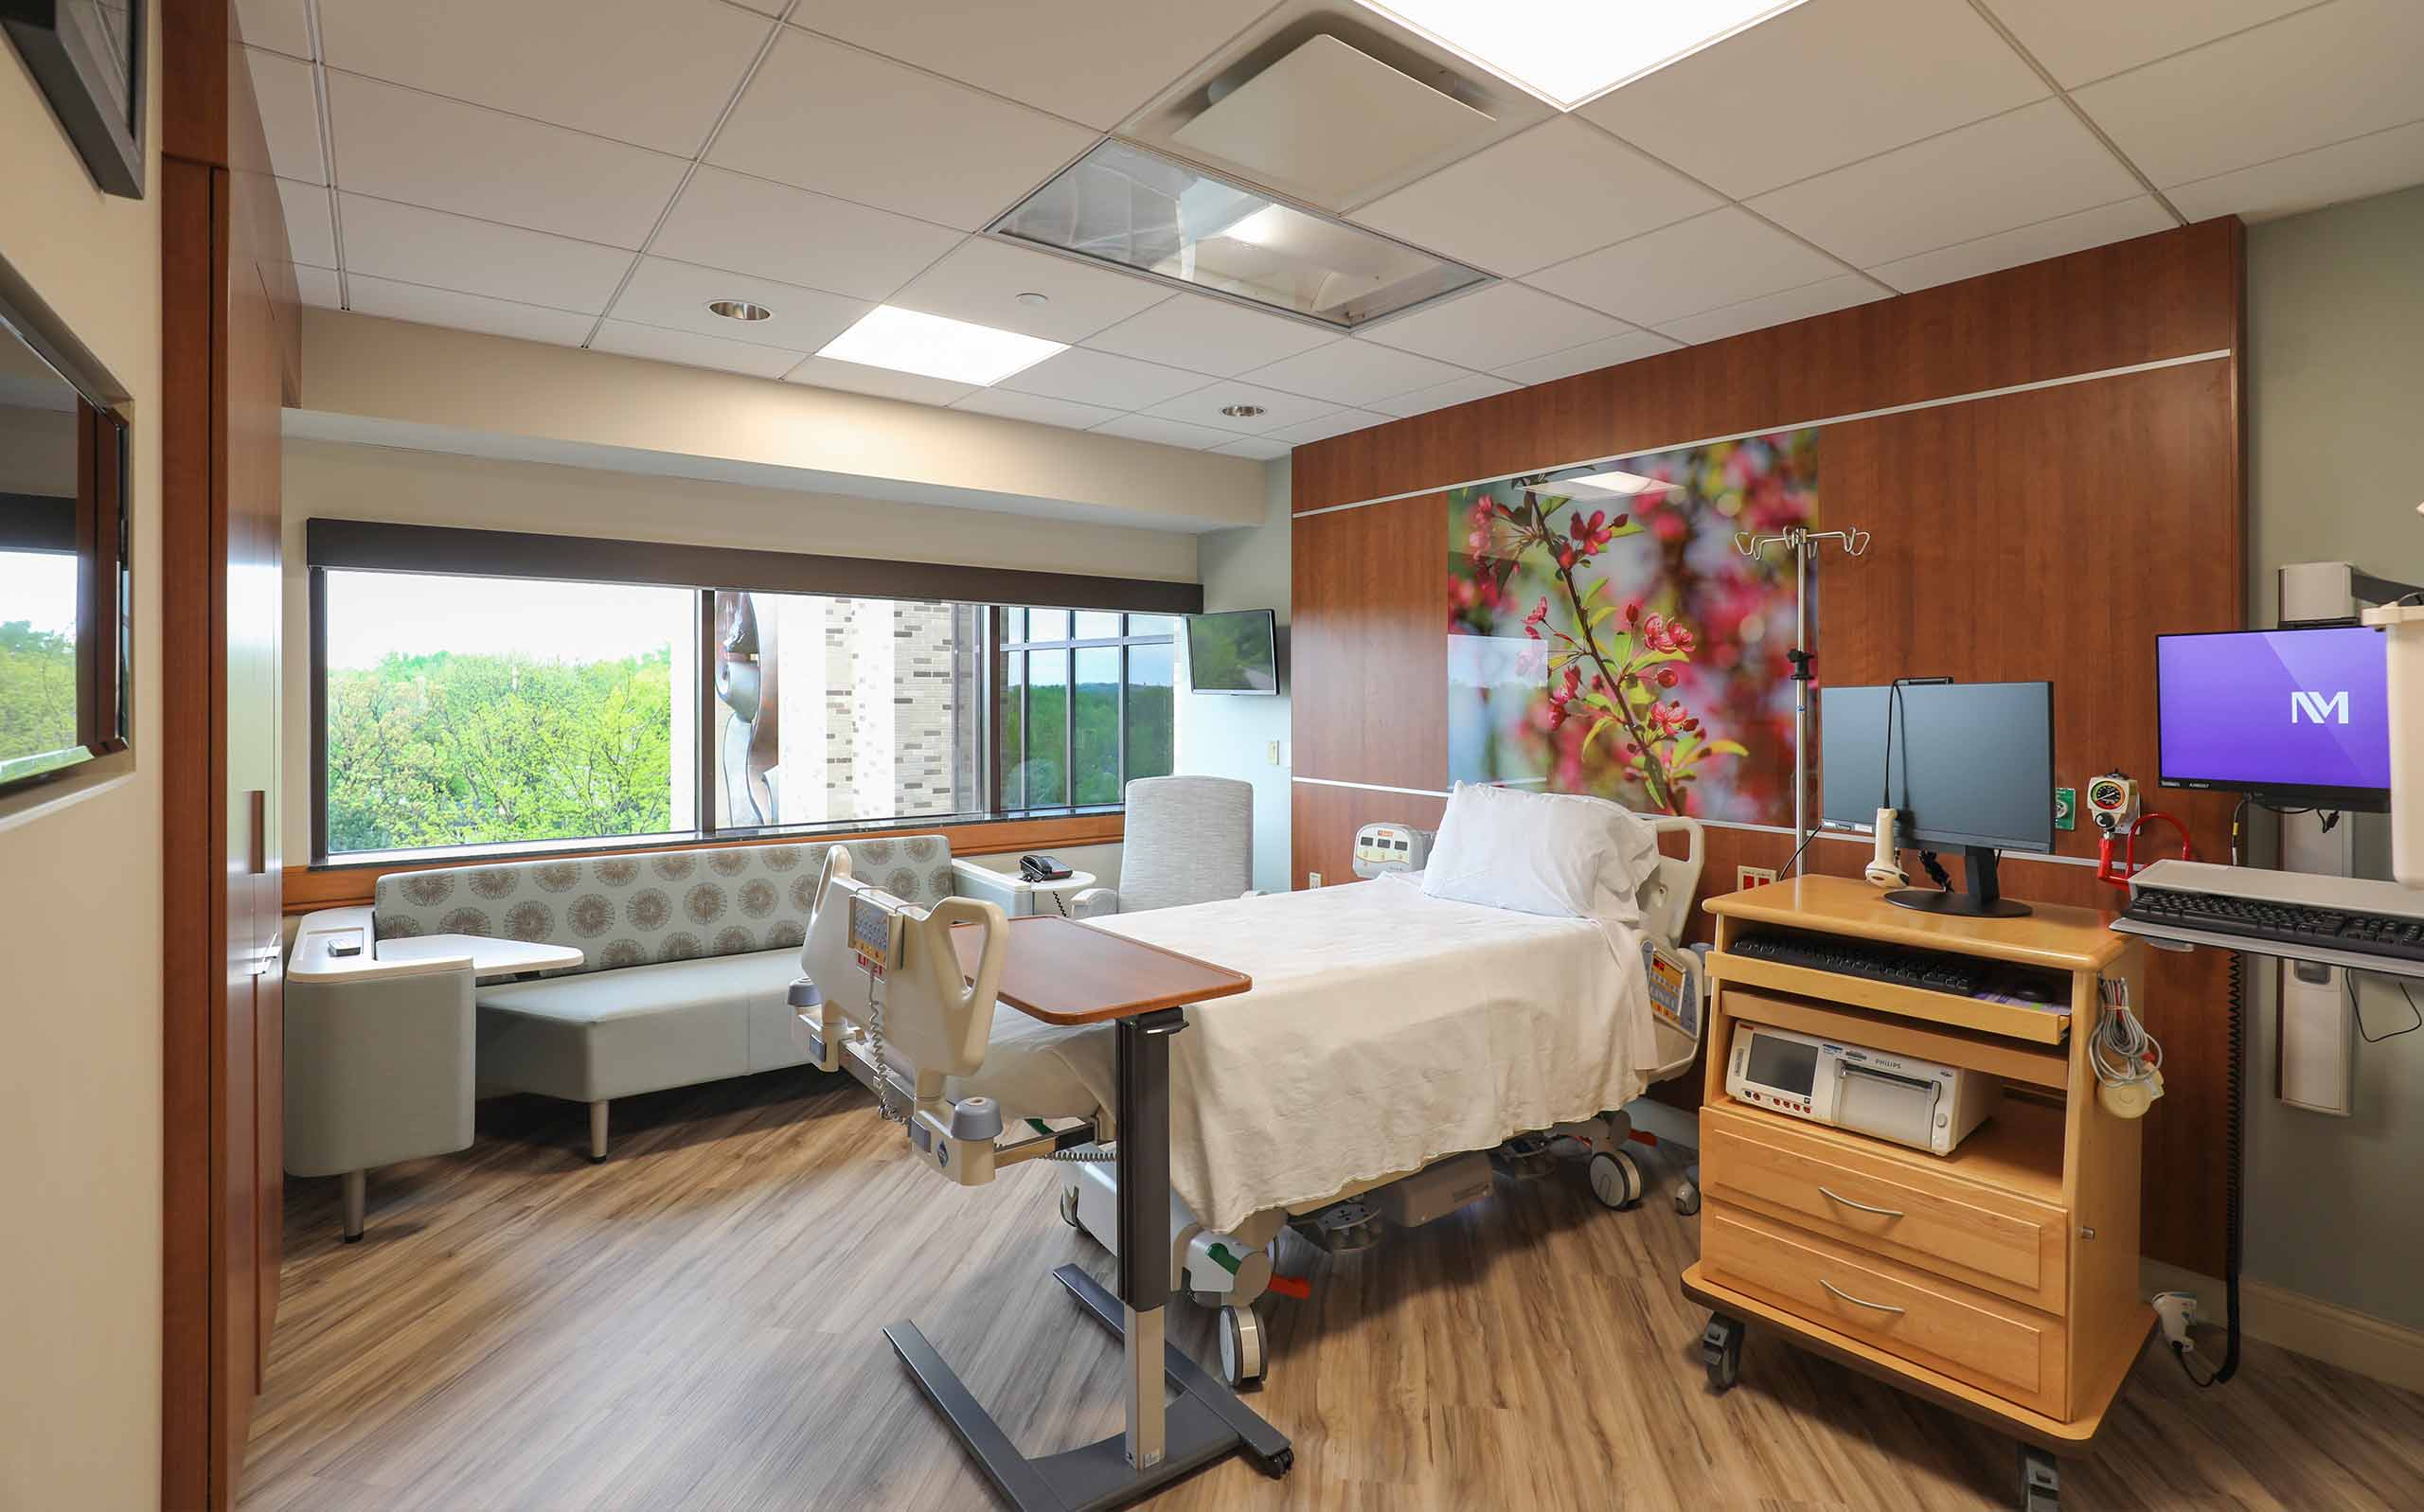 Central DuPage Hospital Mother/Baby Maternity Unit Featured